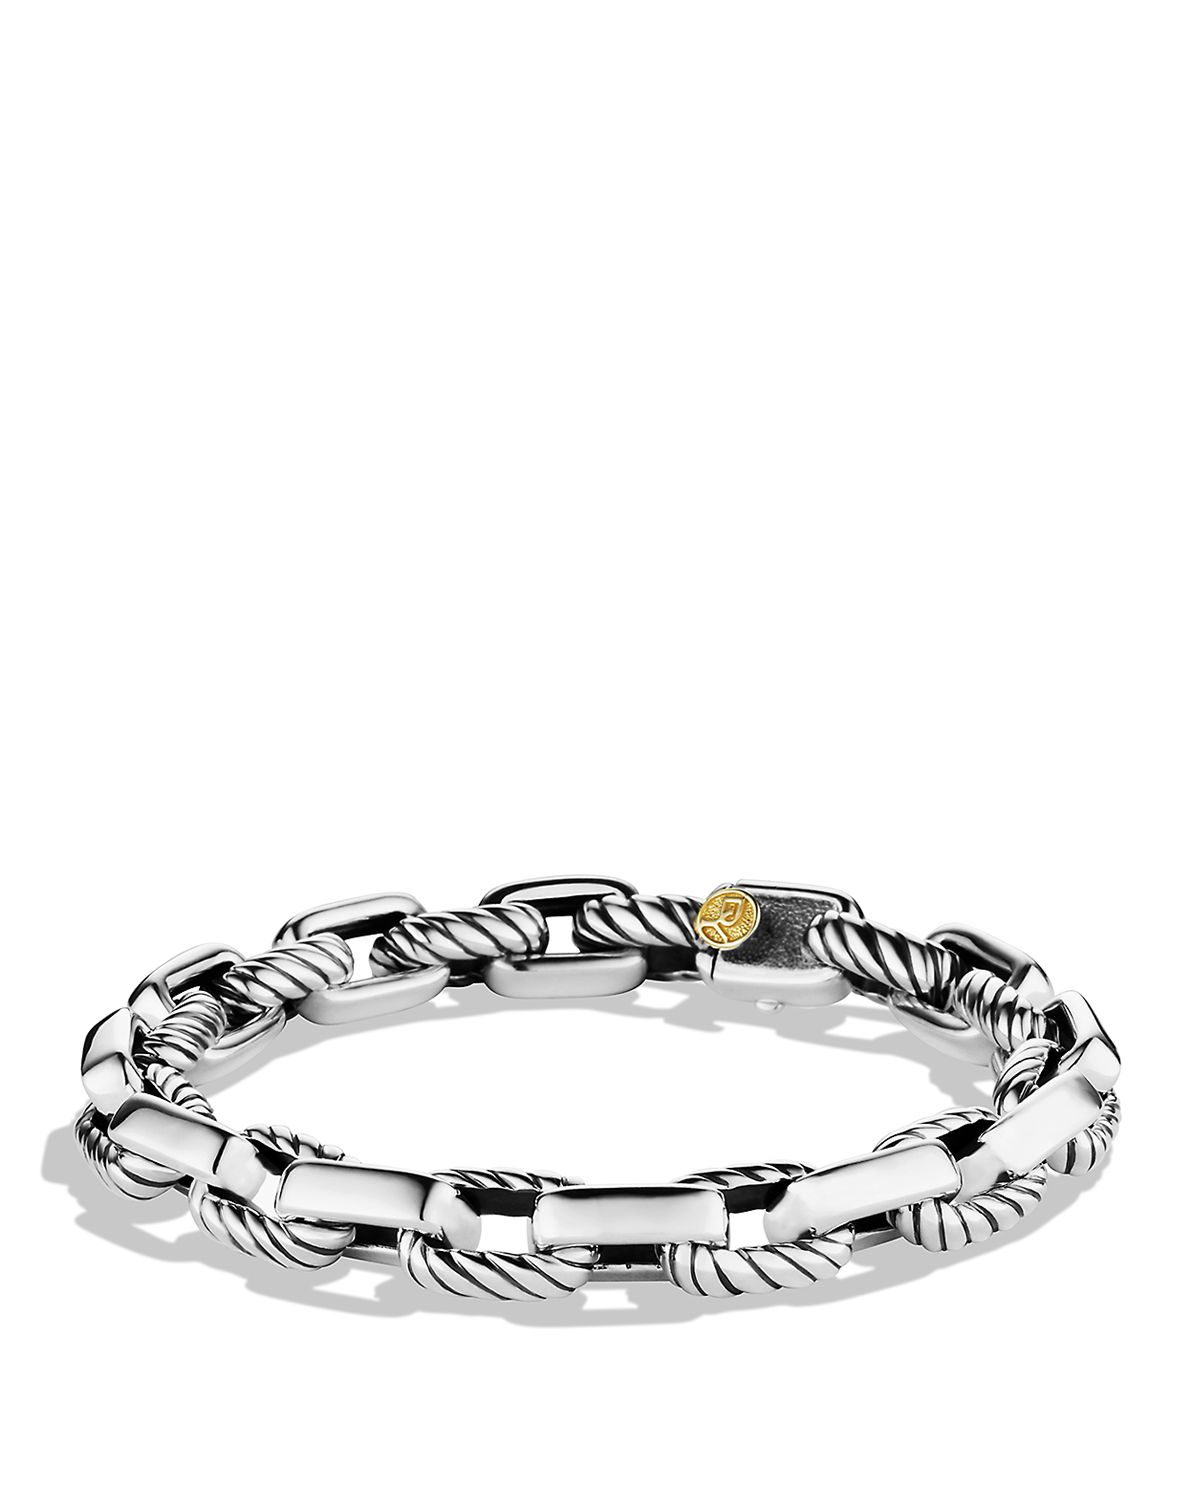 David Yurman Silver Empire Link Bracelet With Gold Product 1 16918796 1 505750941 Normal 